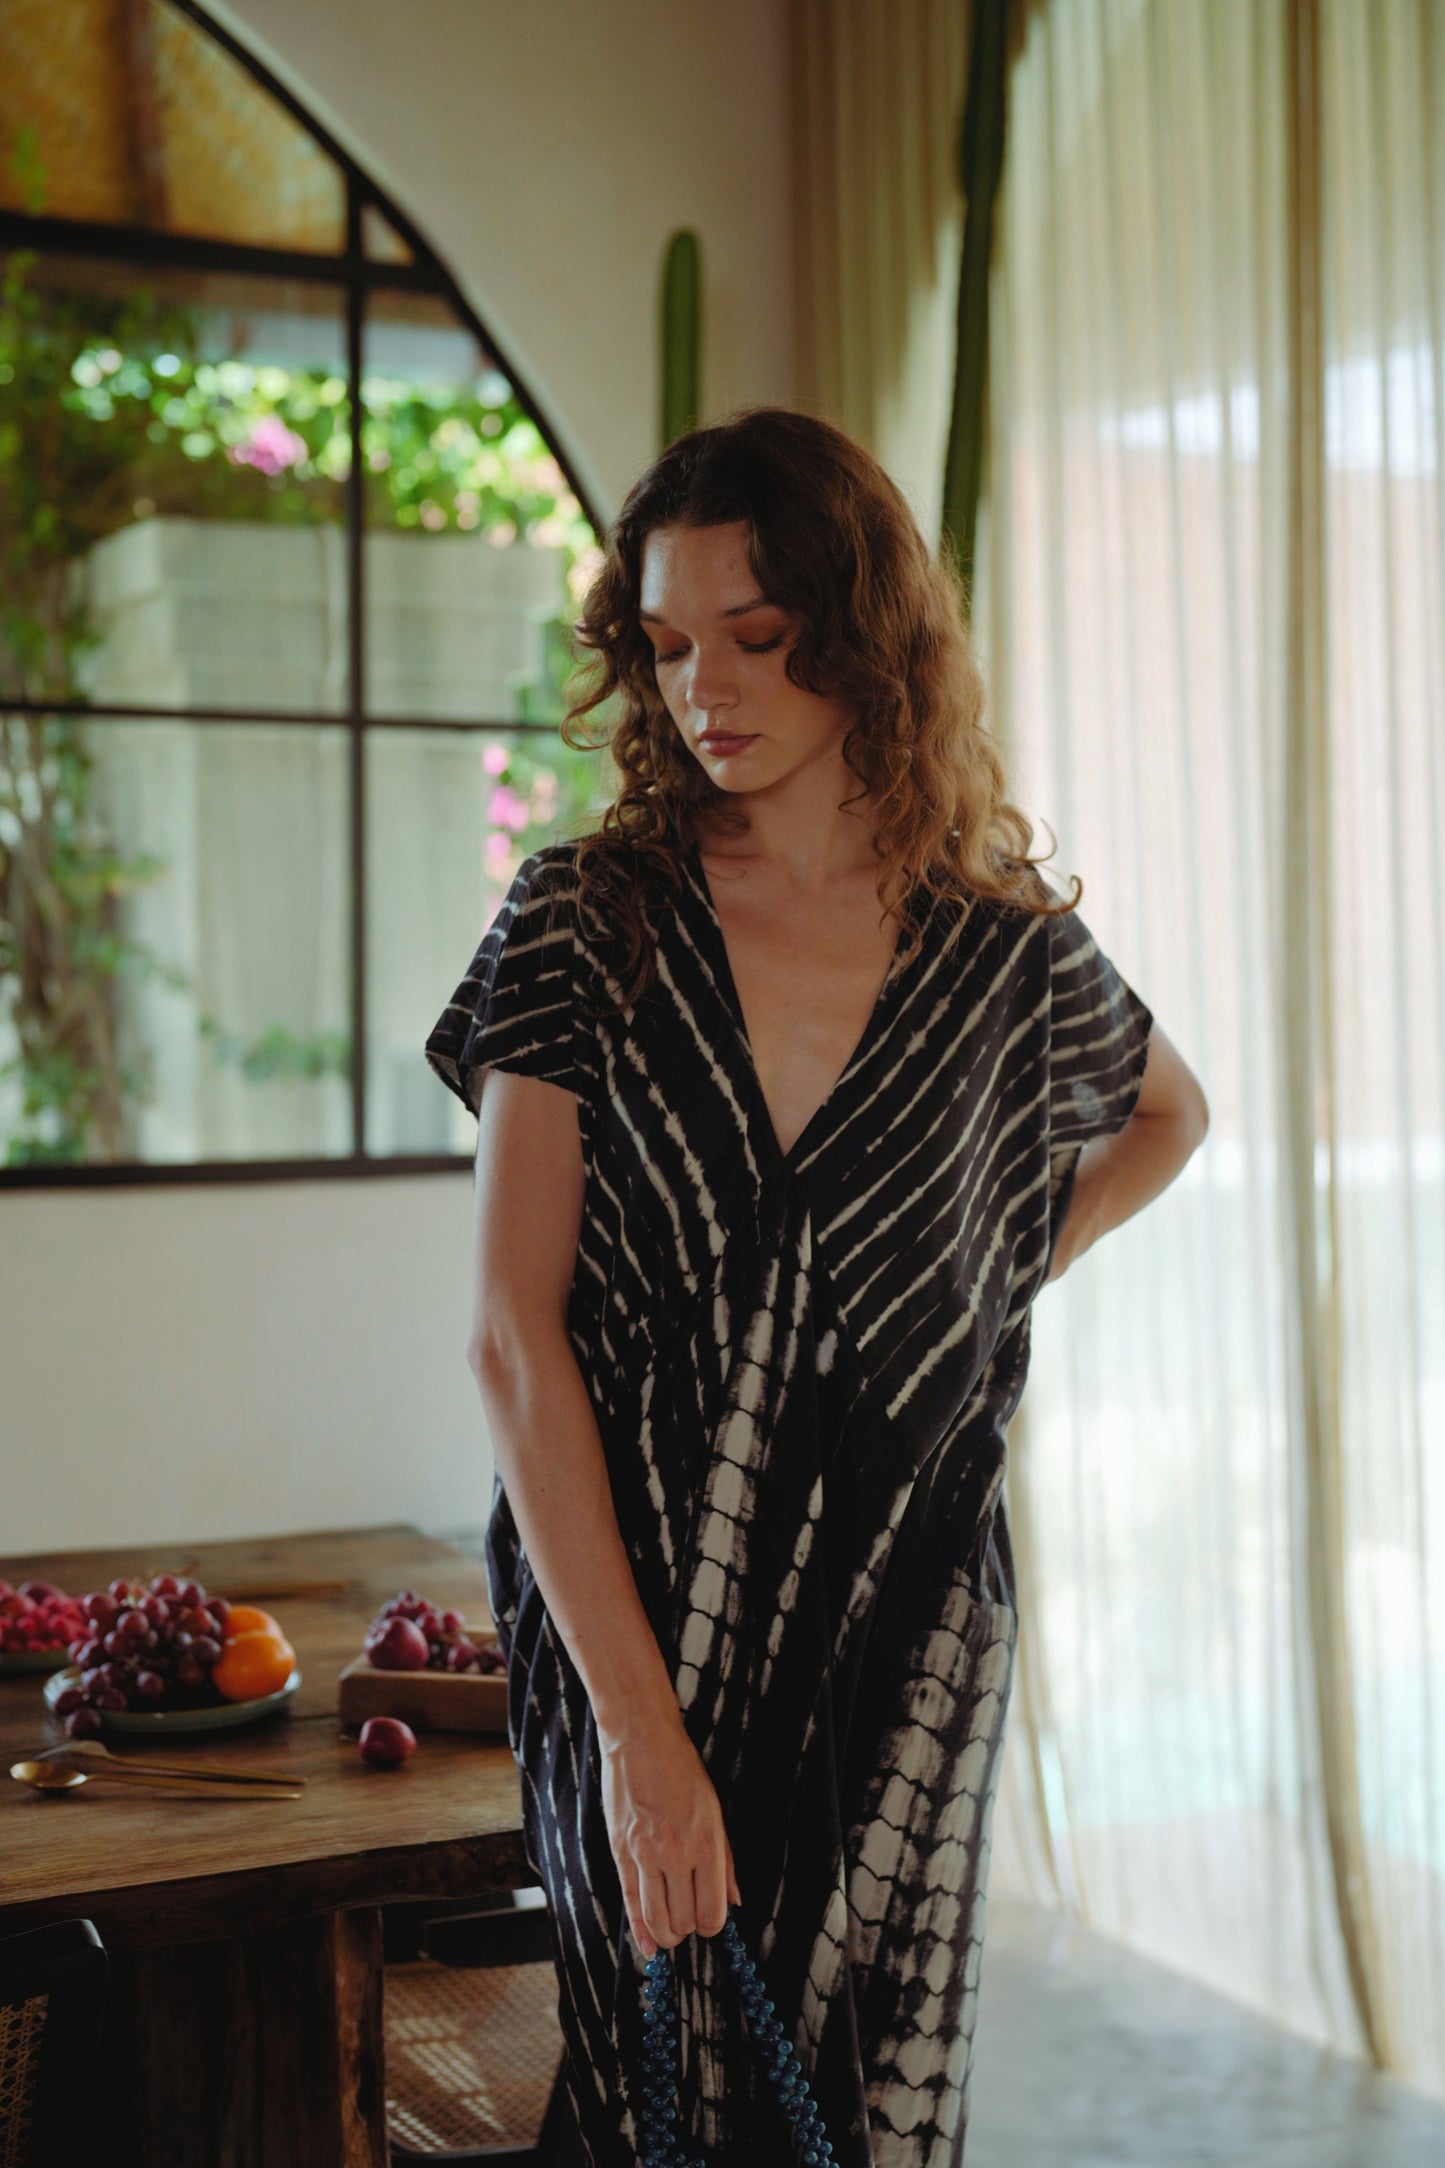 Madella Hand Dyed Kaftan Dress in Black Tie Dyed